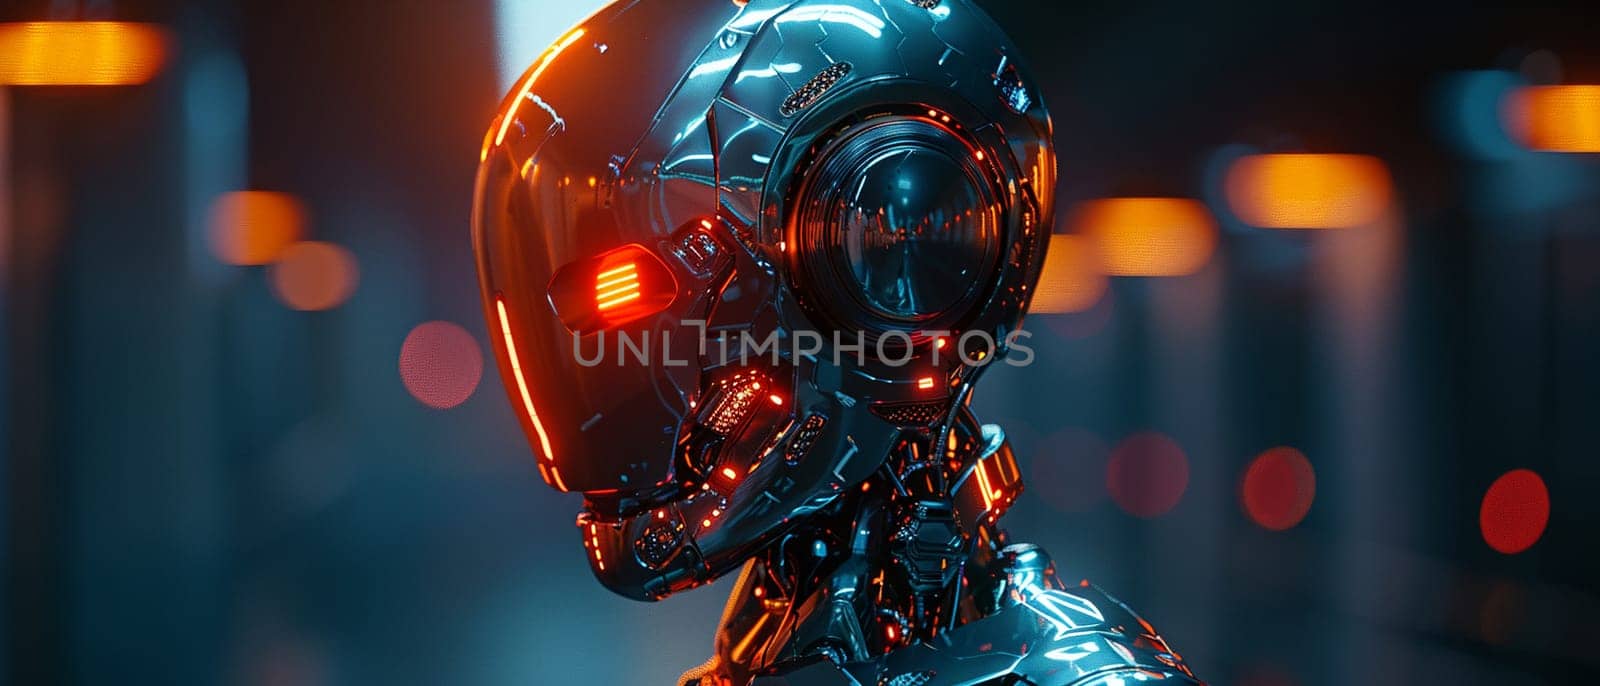 Futuristic android in contemplation, rendered in a sleek 3D style with chrome and neon highlights.